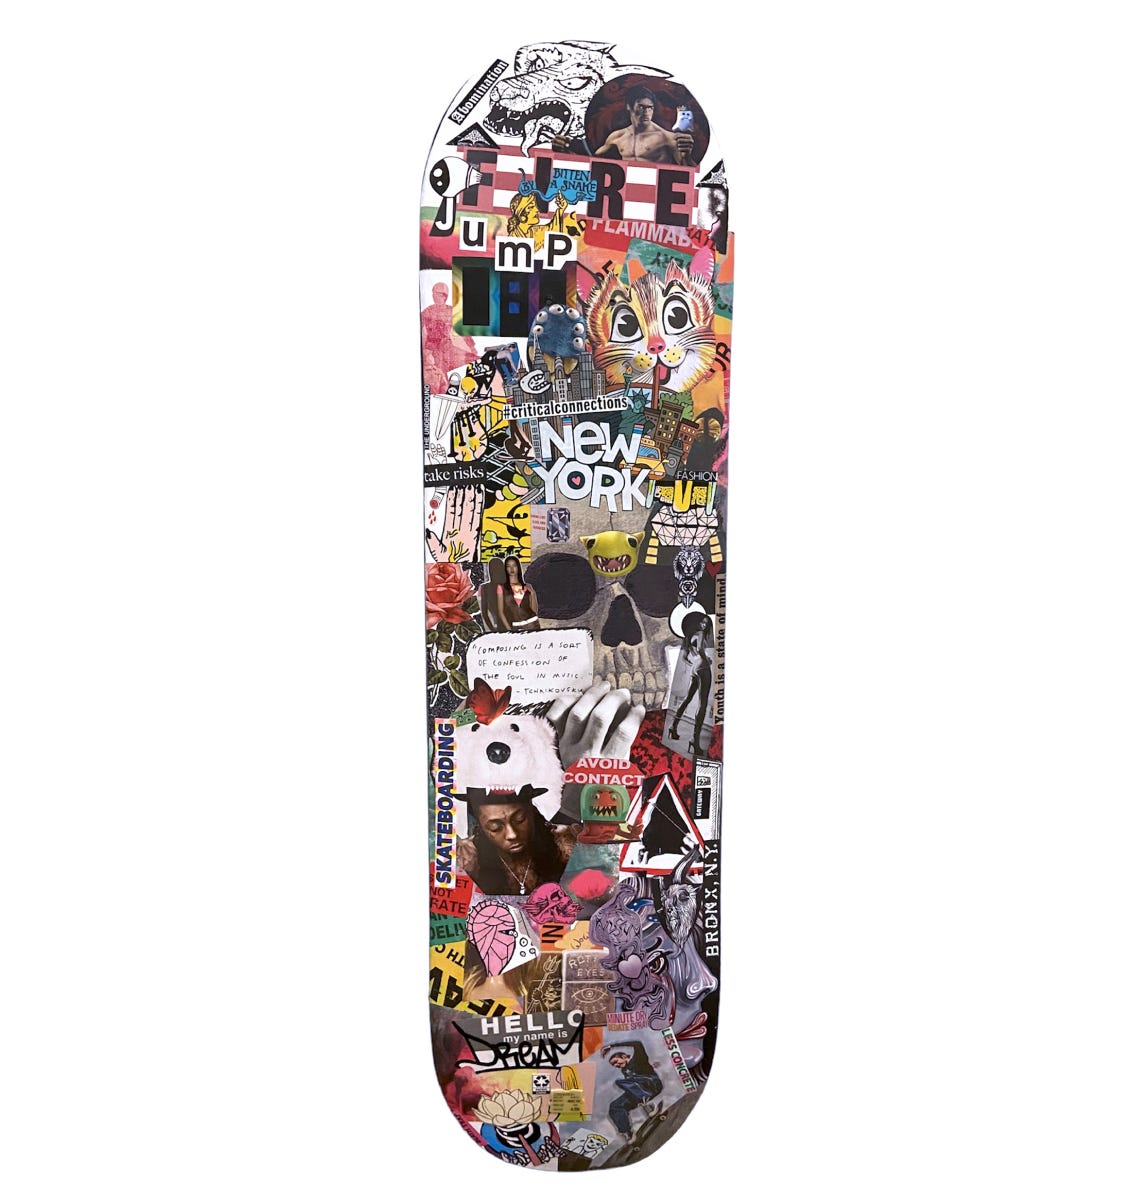 Image of a skateboard with LotyDoty's collage art pasted on top.